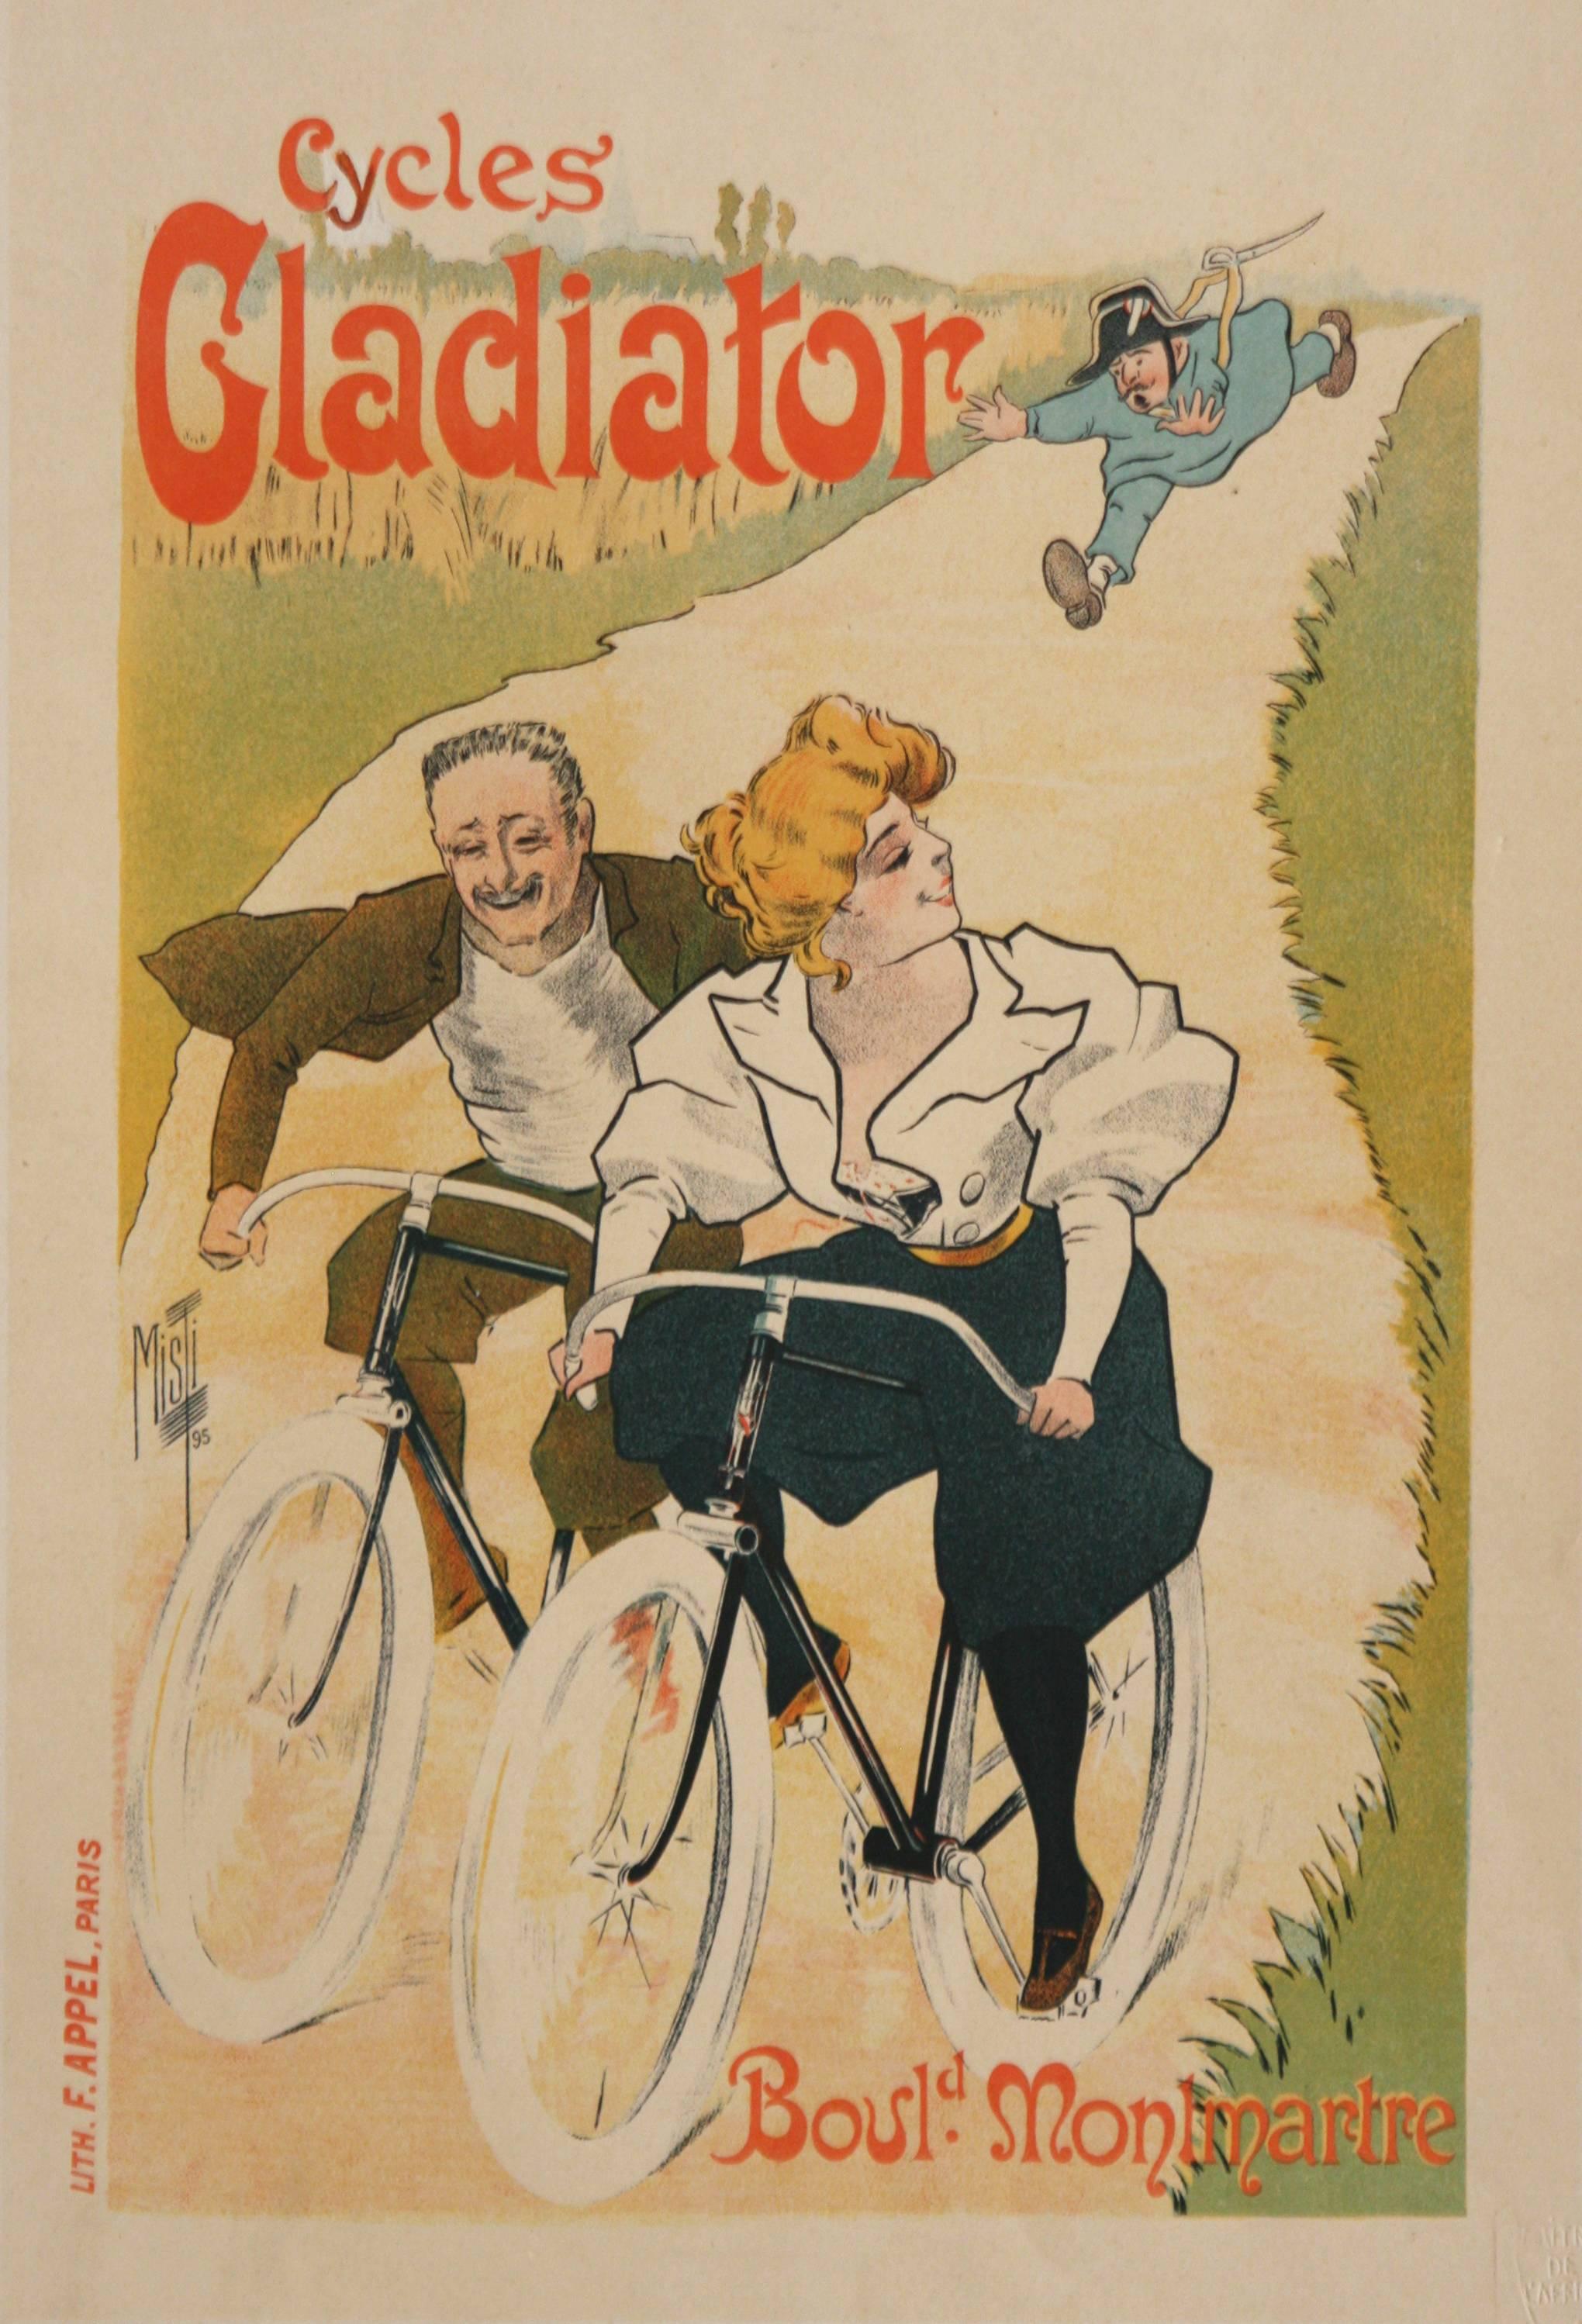 Ferdinand Misti-Mifliez
Cycles Gladiator 
color lithograph
11.25 x 15.50
Cycles Gladiator-Maitres de l'Affiche-Plate 86 by Ferdinand Misti-Mifliez shows a woman and a man riding down the boulevard with a gendarme in hot pursuit.  This lithograph is